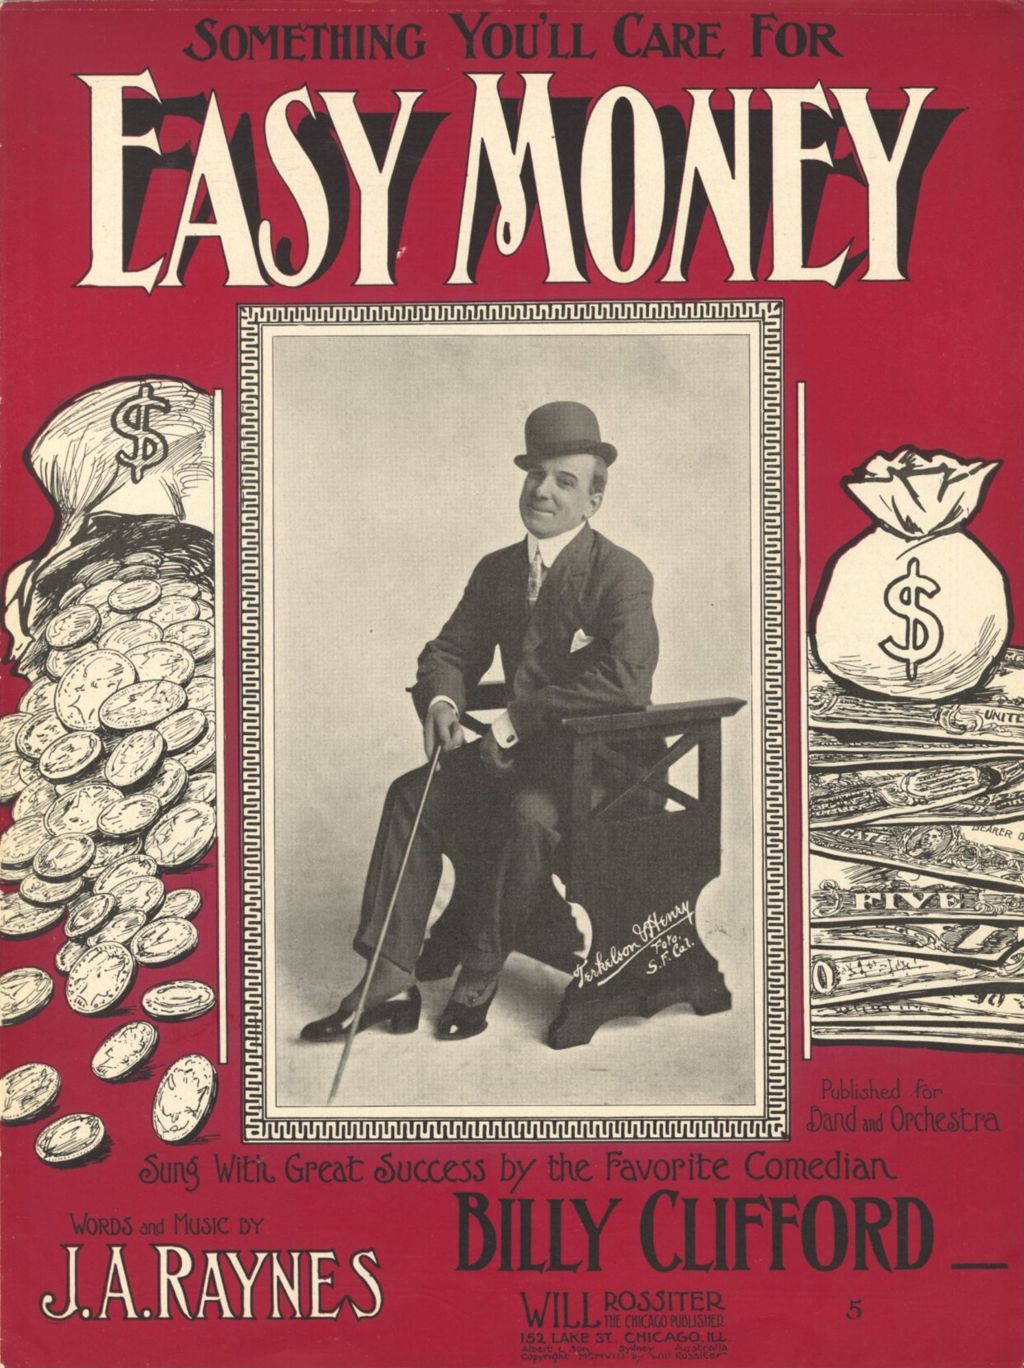 Miniature of Easy Money (Something You'll Care For)